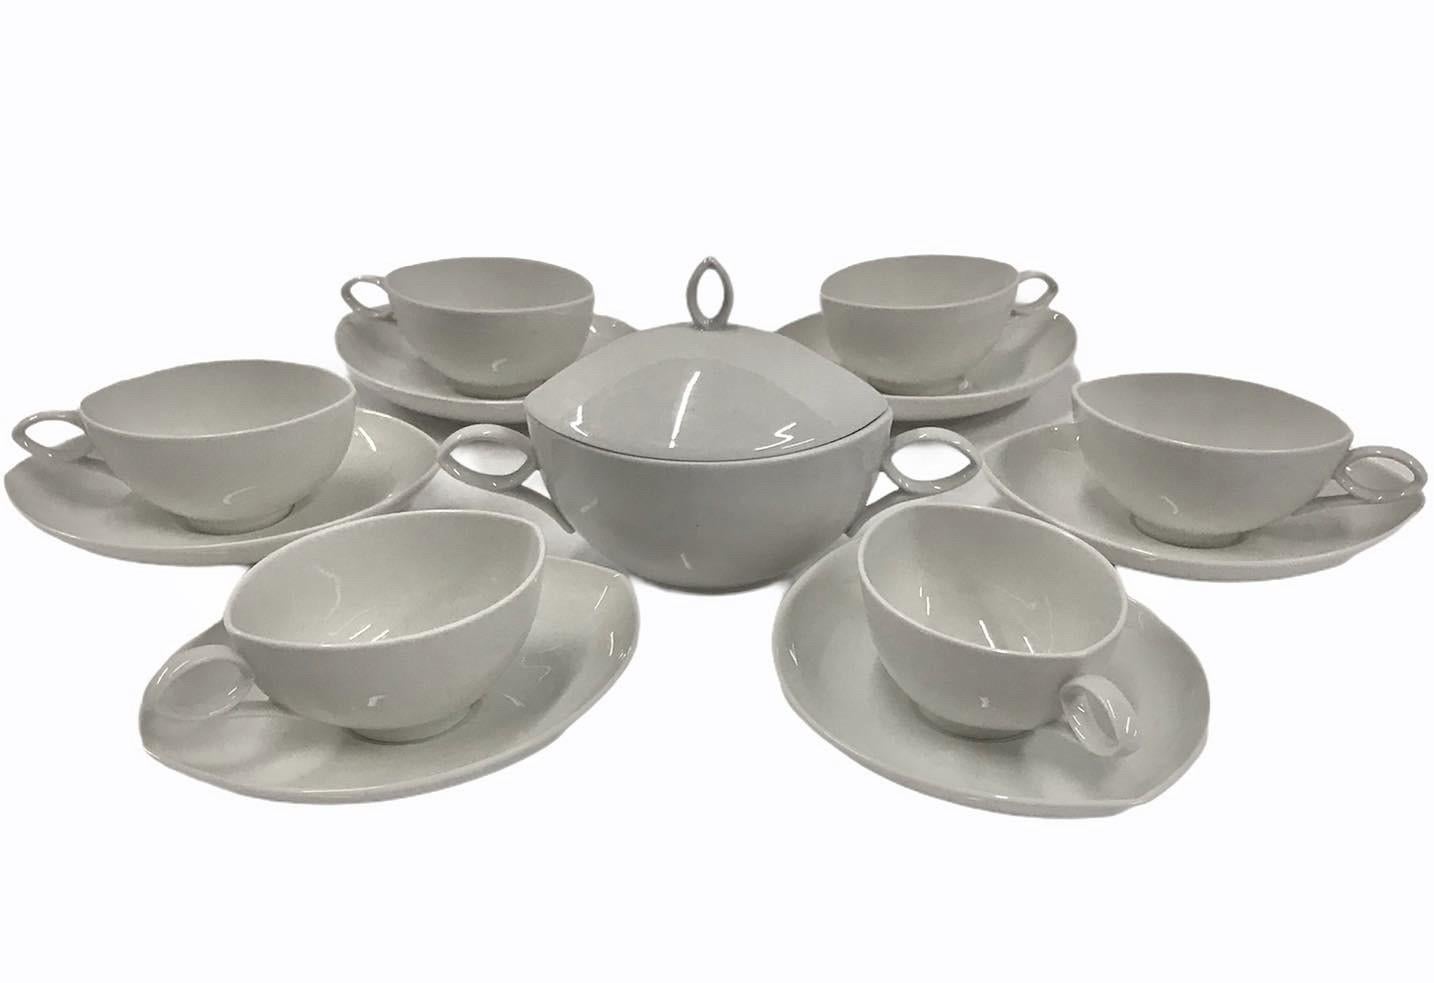 Reduced from $285....The OVAL pattern designed by Rudolf Lunghard for Rosenthal, Mid Century Modern Set of 6 cups and saucers plus sugar. In the demitasse, espresso or moka size. This lovely 1951 rarely seen set in fine translucent white porcelain